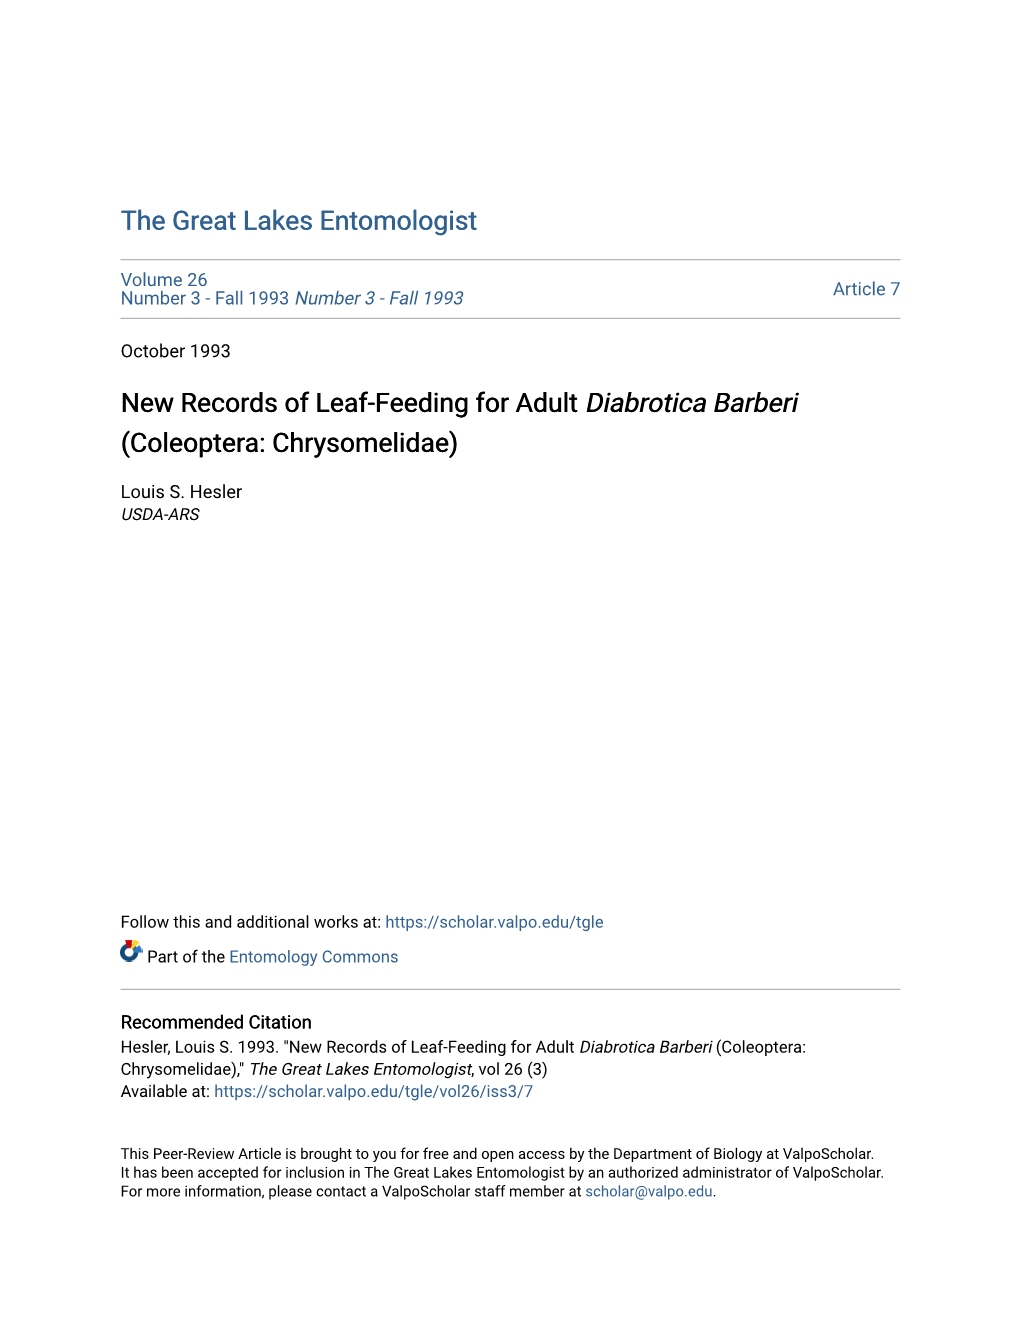 New Records of Leaf-Feeding for Adult Diabrotica Barberi (Coleoptera: Chrysomelidae)